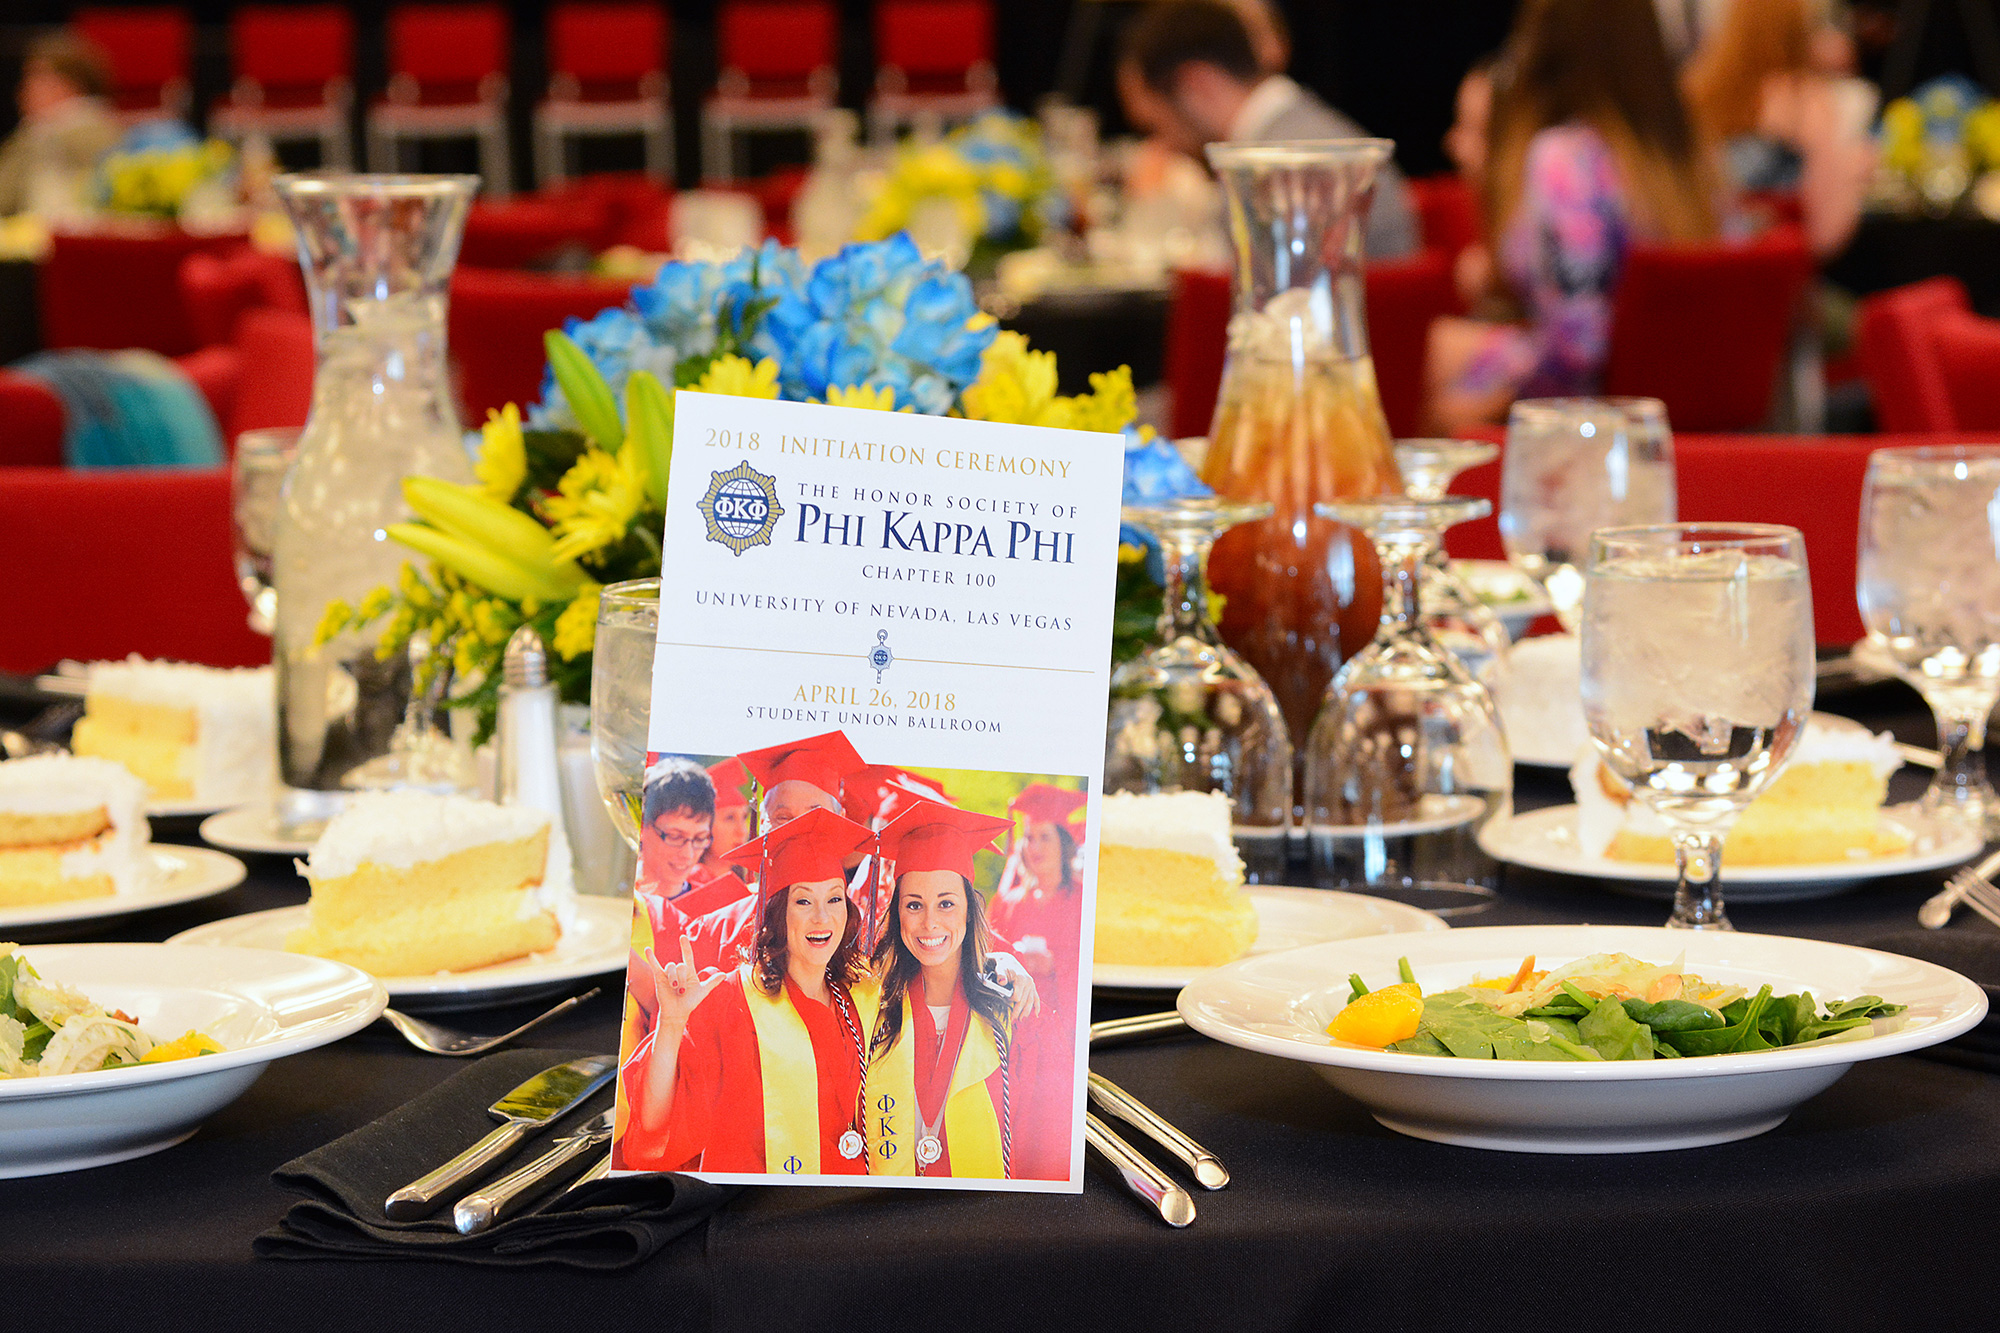 Banquet table featuring a Phi Kappa Phi program